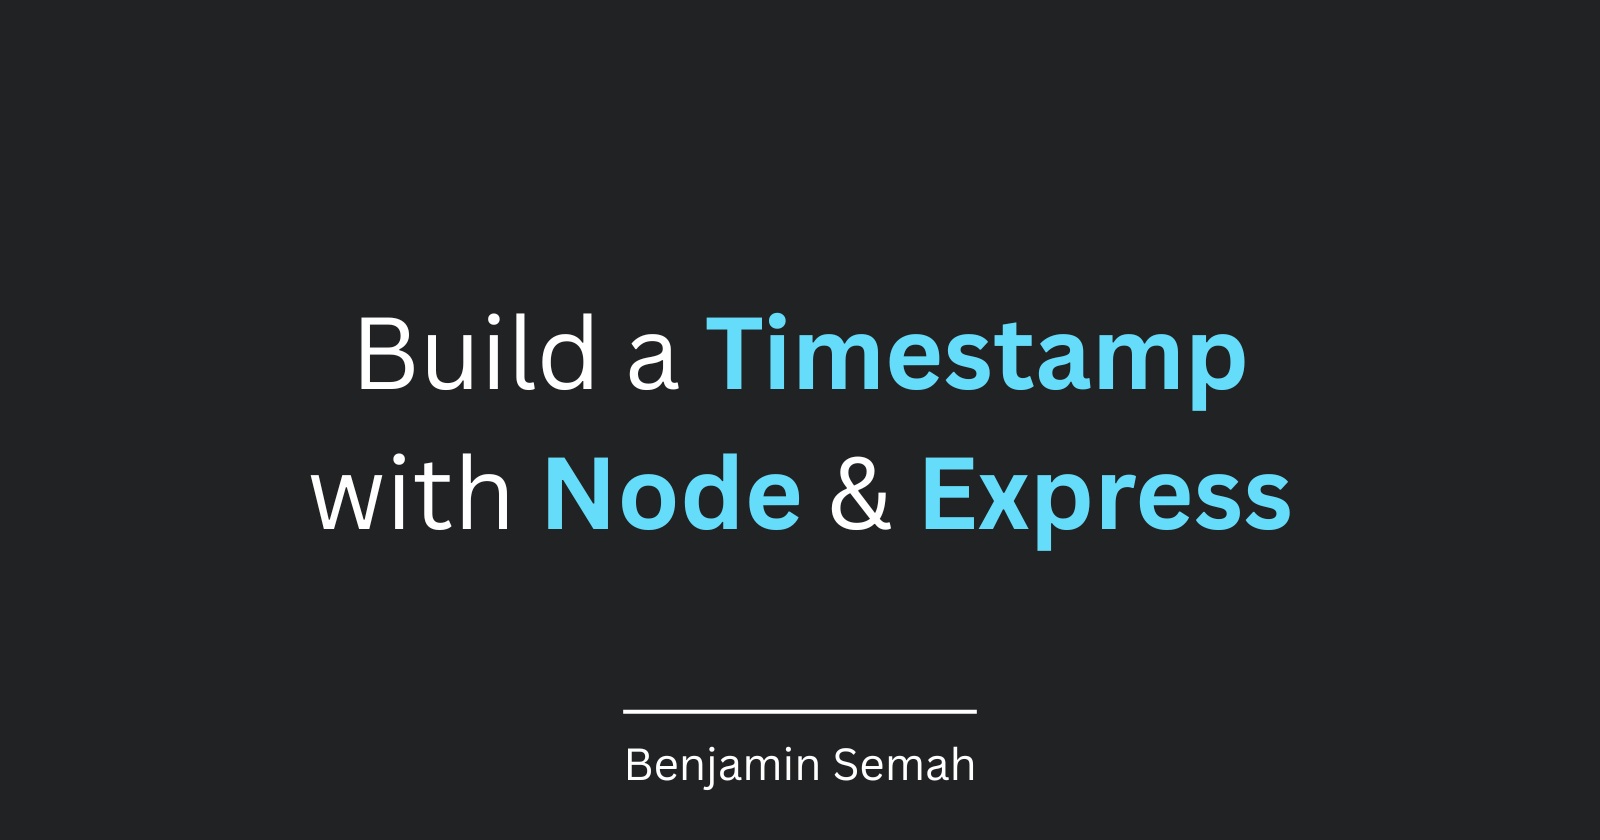 Build a Timestamp Microservice with Node and Express